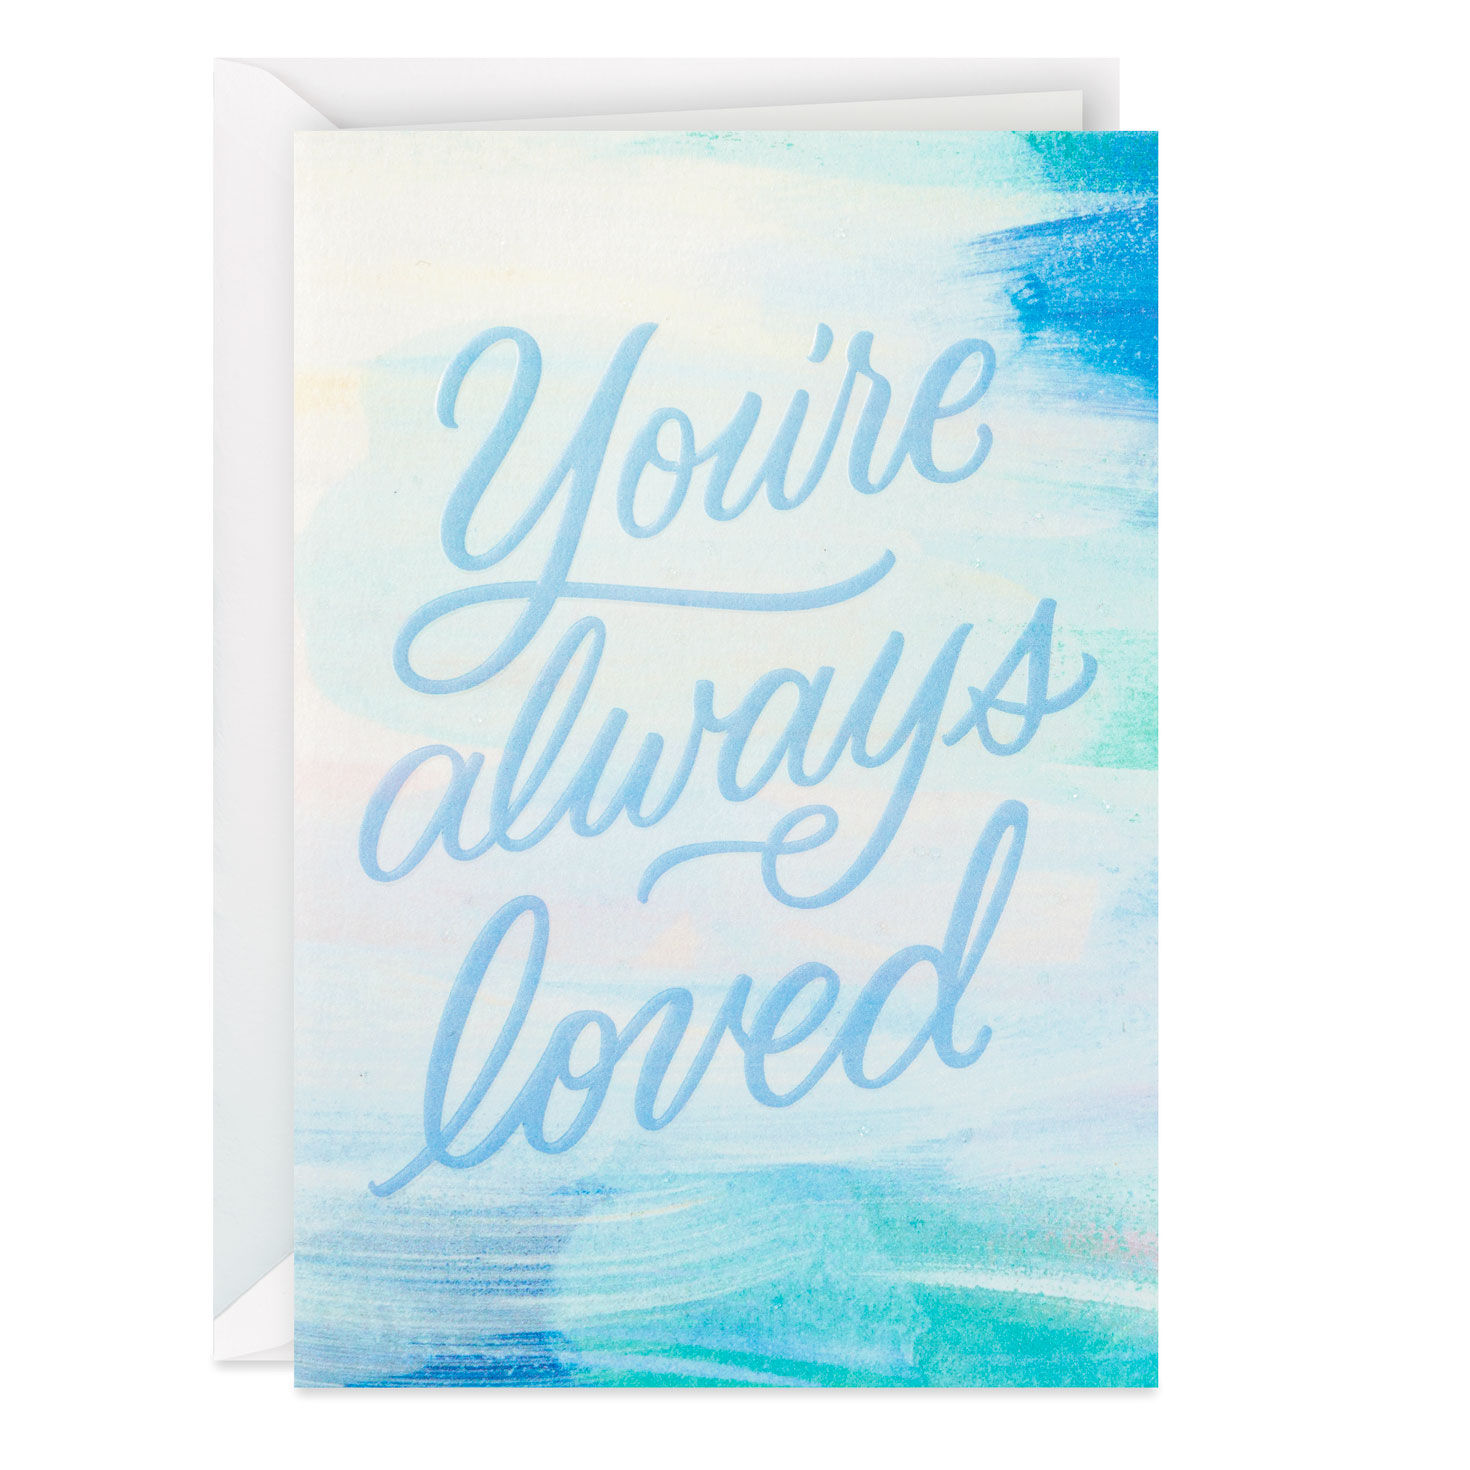 You're Always Loved Encouragement Card for only USD 5.99 | Hallmark